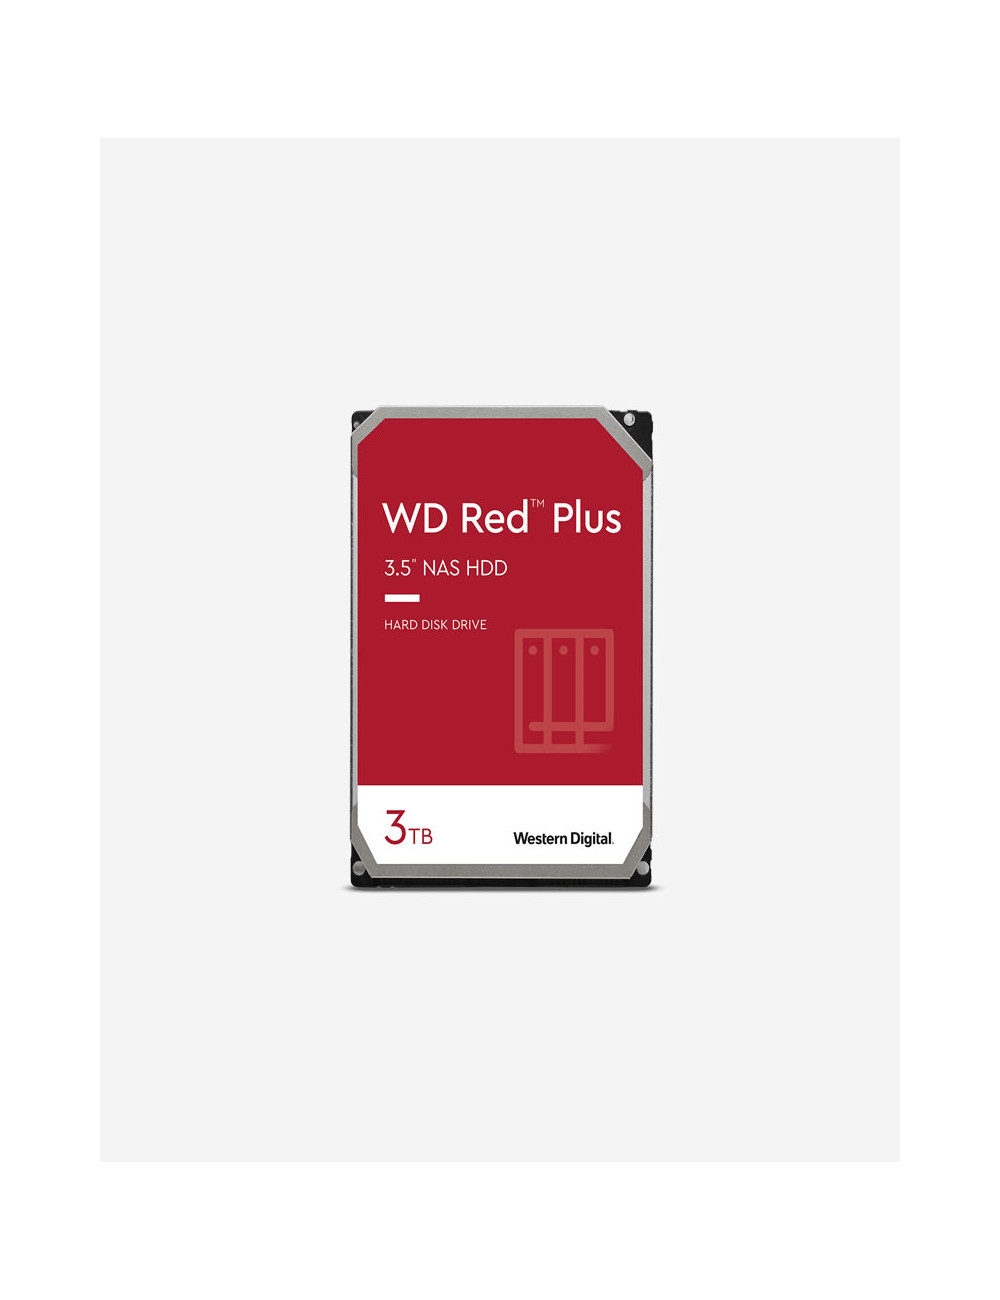 WD RED PLUS 3TB 3.5" HDD Drive